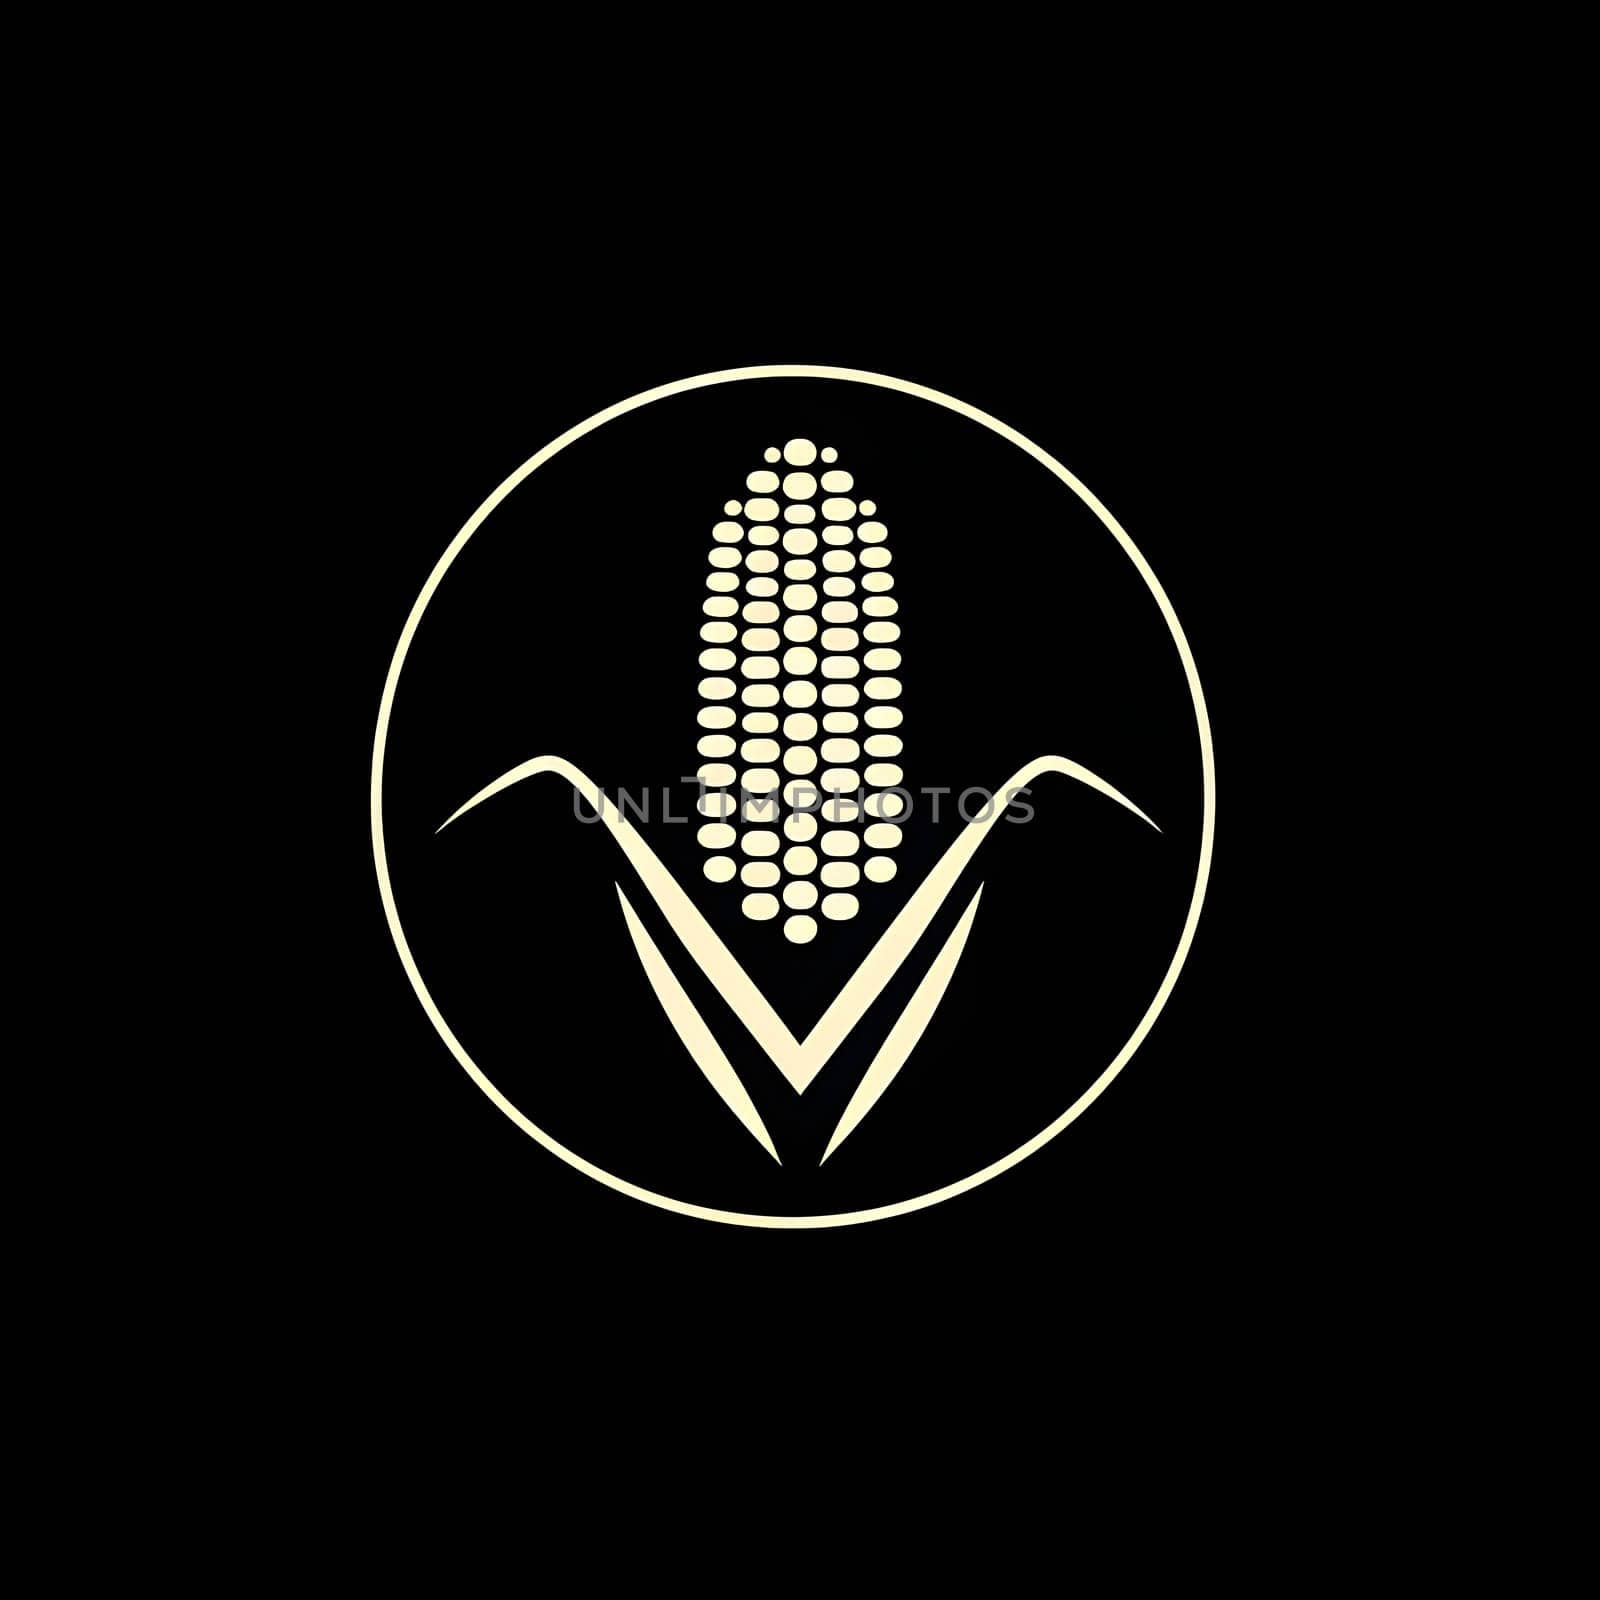 Logo in circle corn cob on black isolation background. Corn as a dish of thanksgiving for the harvest. An atmosphere of joy and celebration.